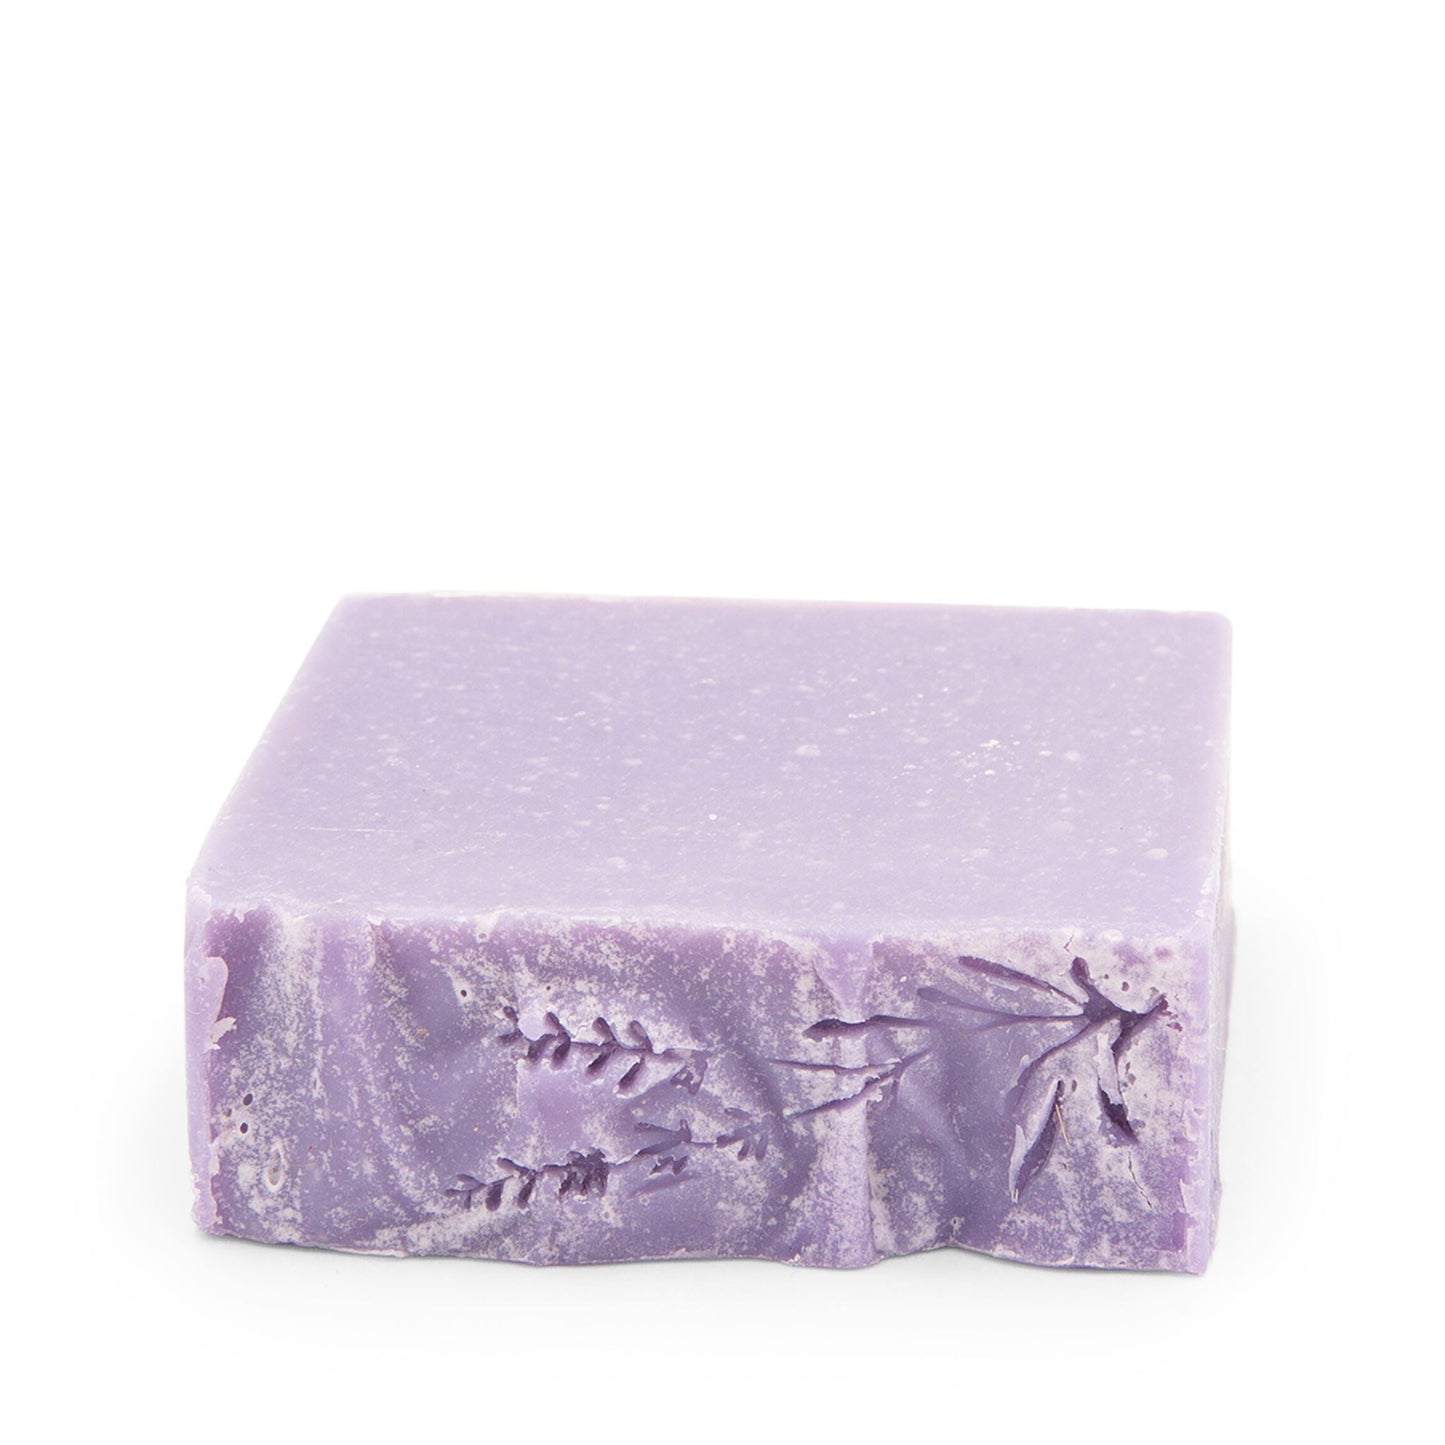 Janni Bars Soap Janni Bars Cold Pressed Soap - Relaxing Lavender